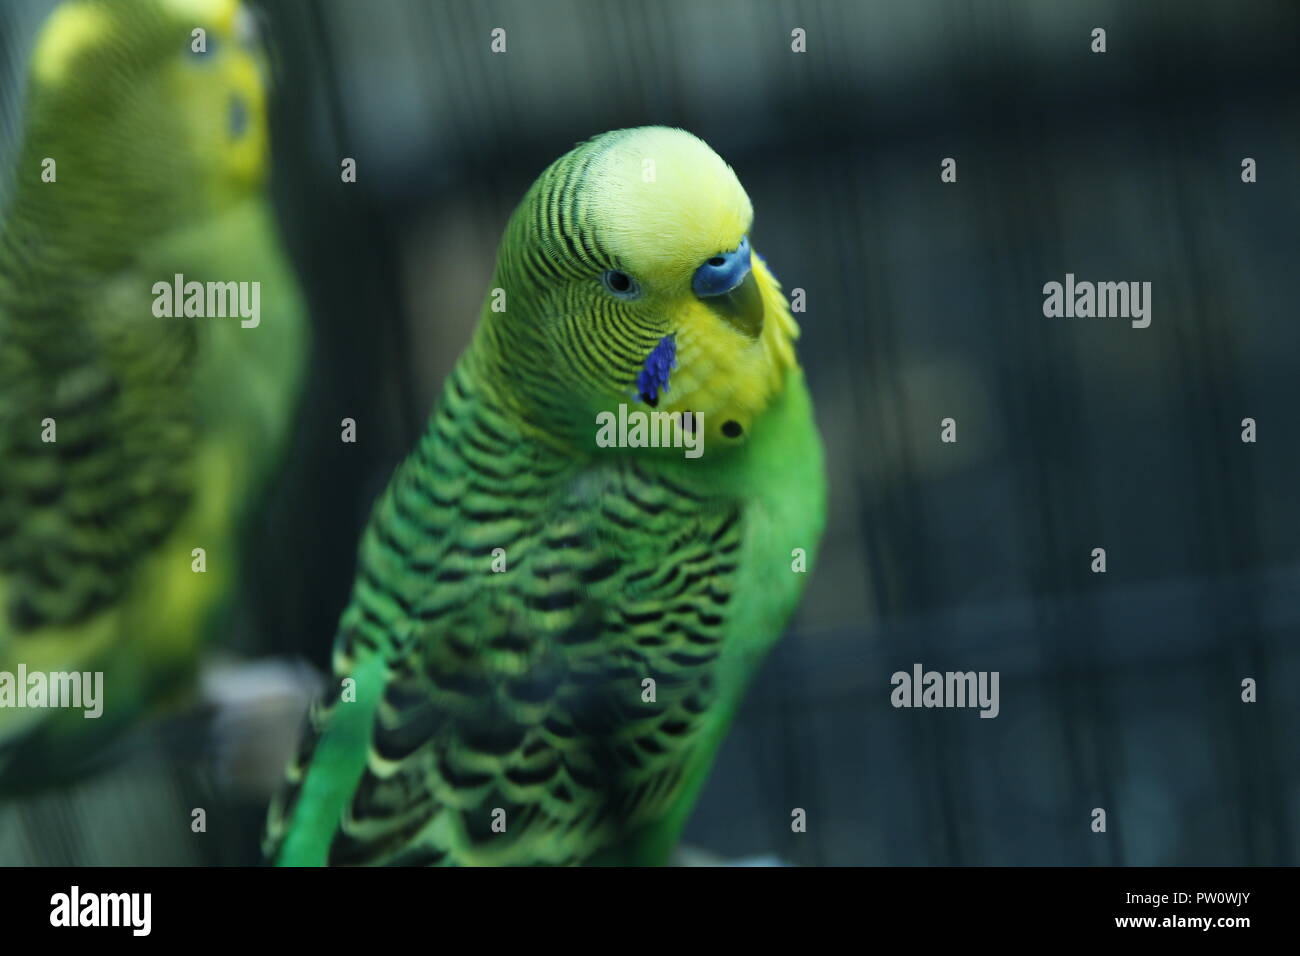 Page 3 - Red Budgerigar High Resolution Stock Photography and Images - Alamy